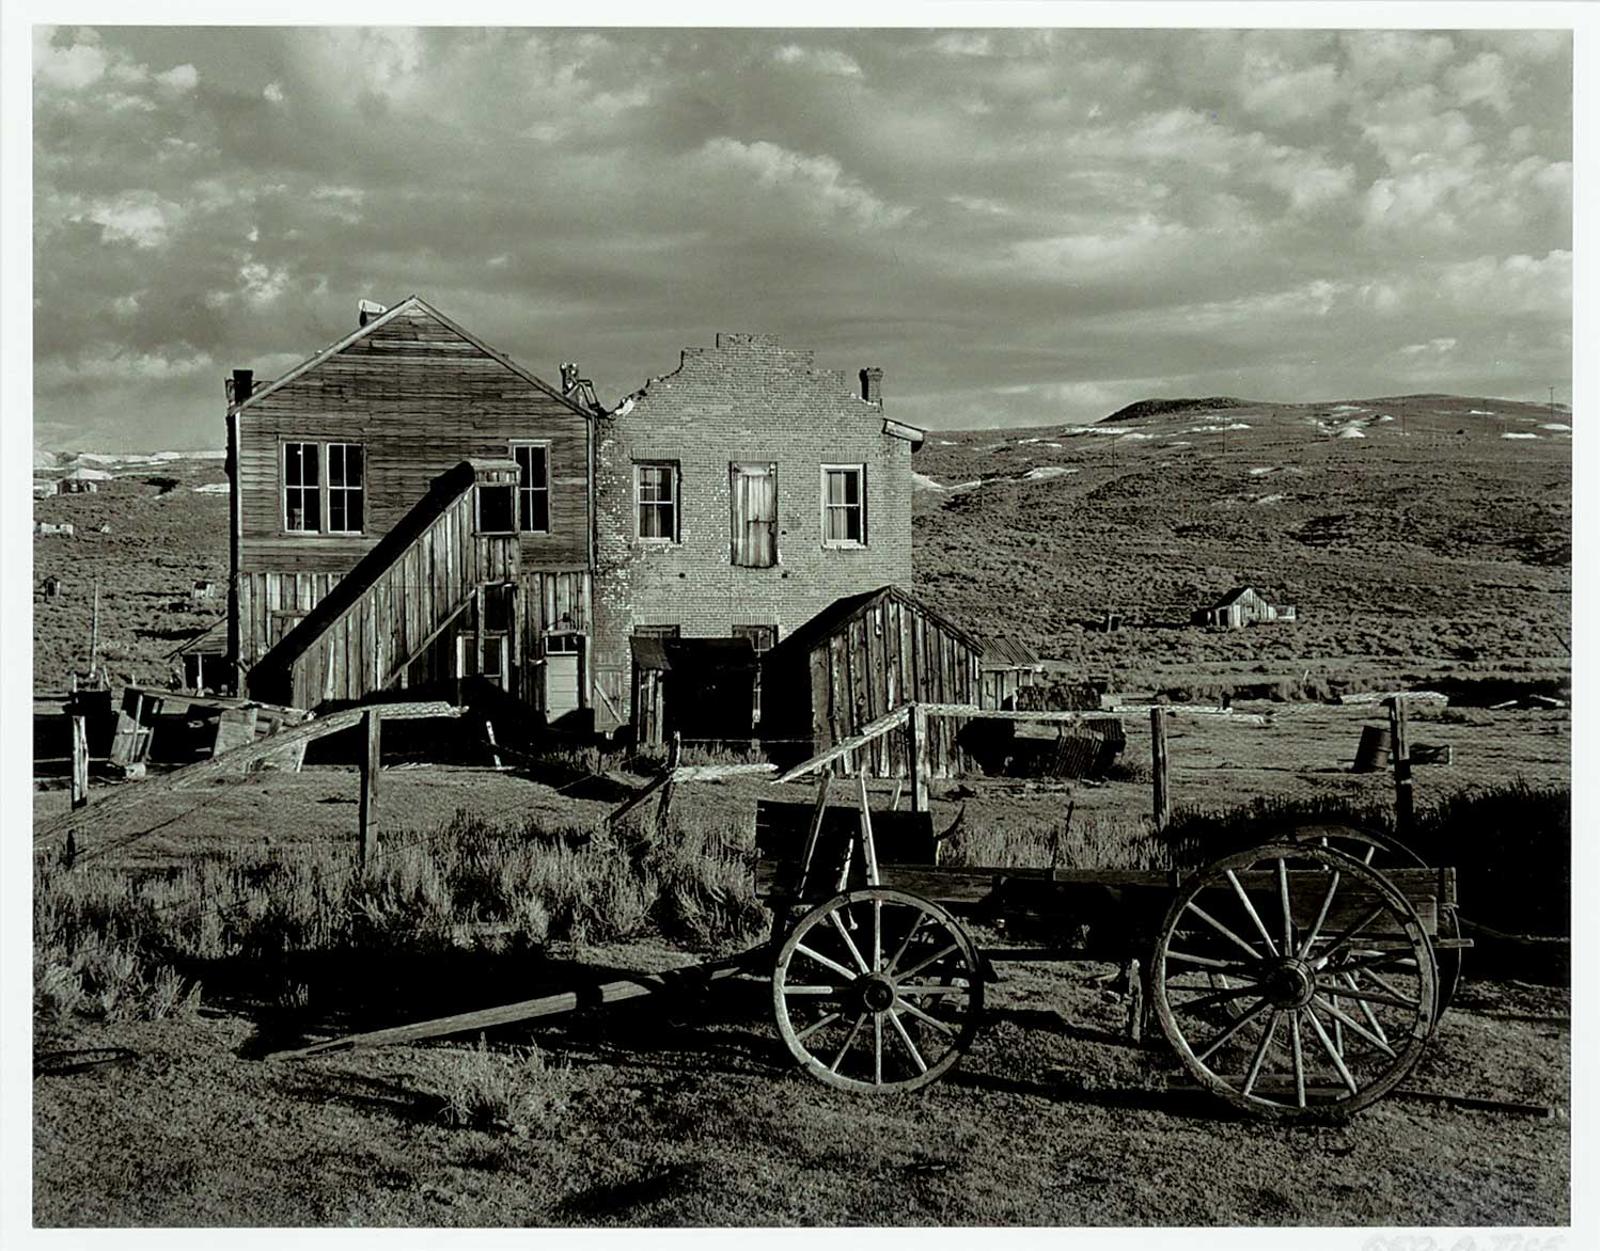 George A. Tice (1938) - Wagon and Buildings, Bodie, ca. 1965